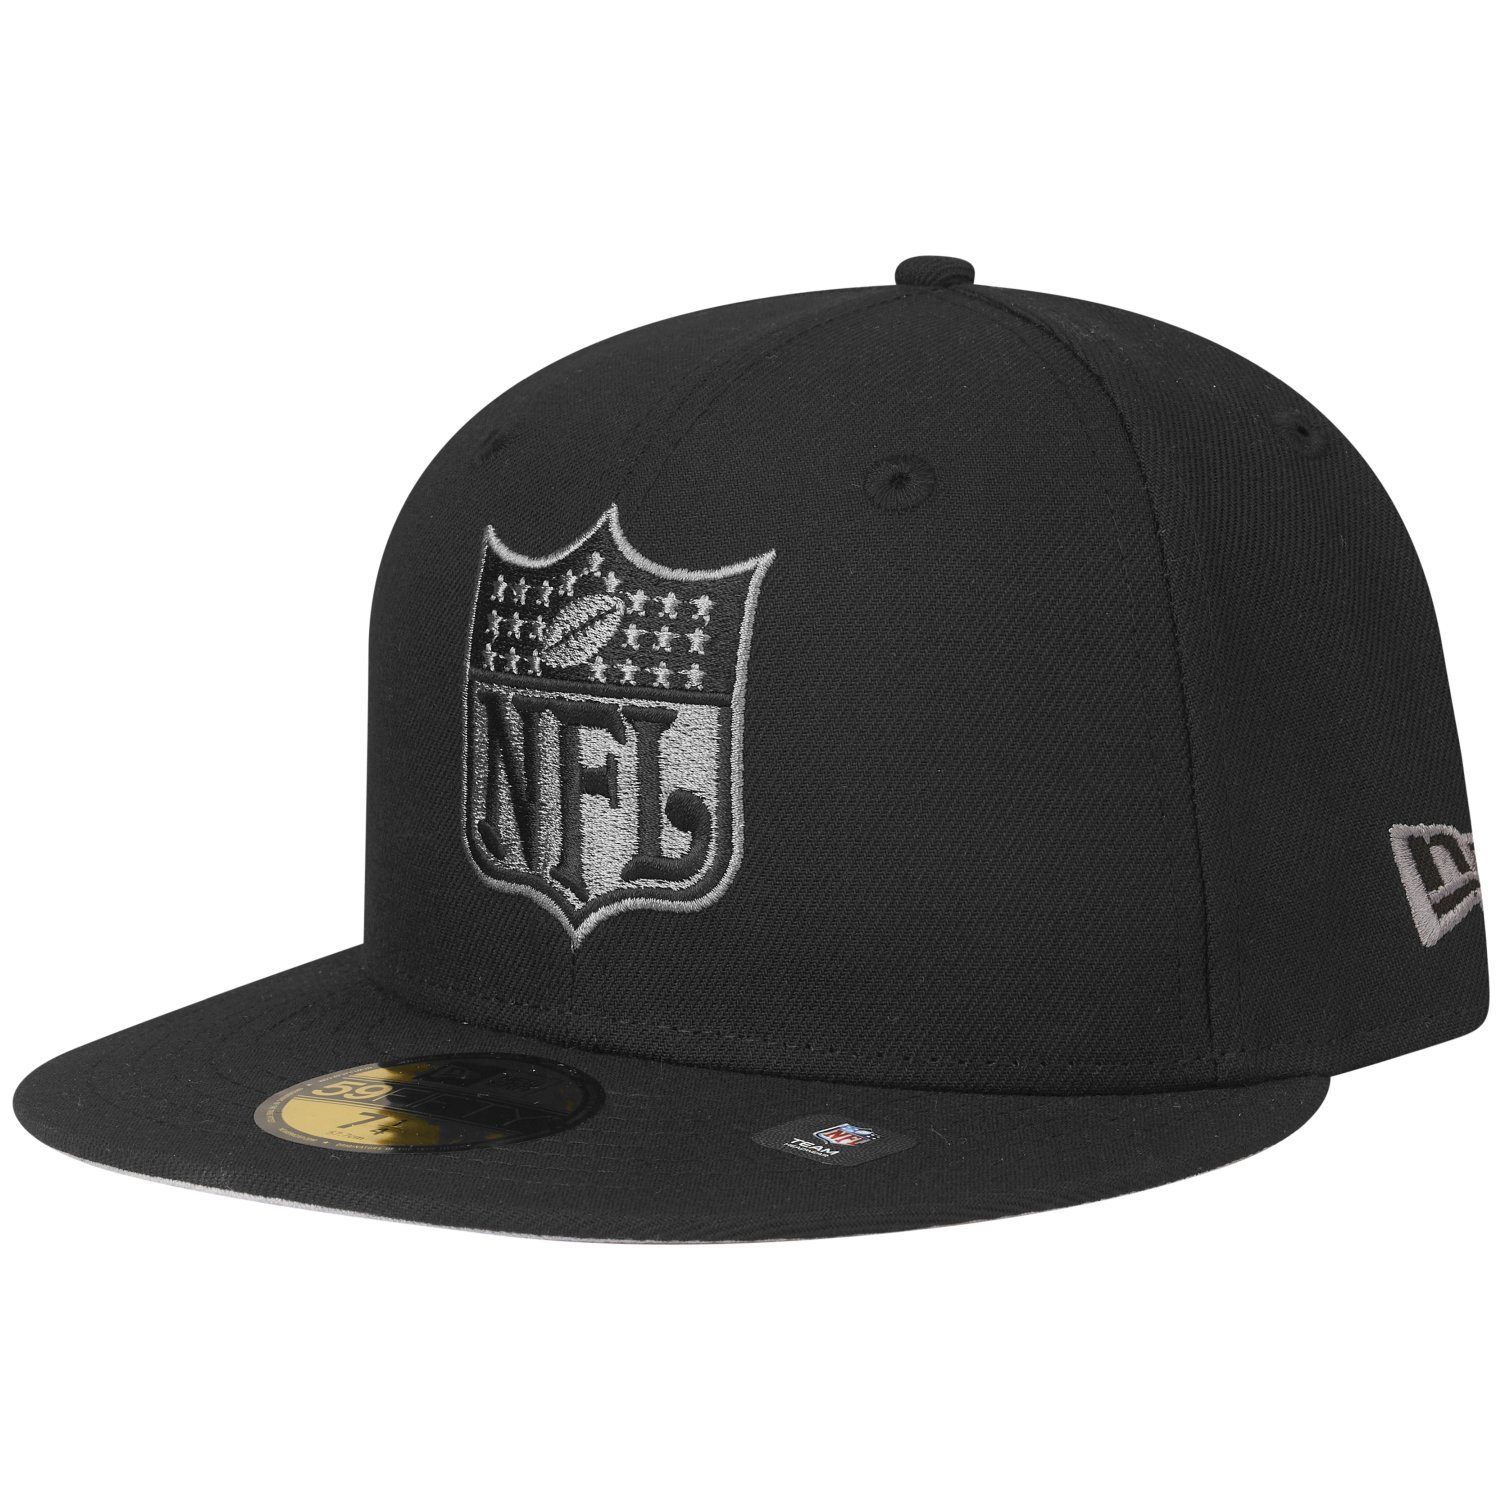 SHIELD NFL Cap New Era NFL Fitted TEAMS 59Fifty